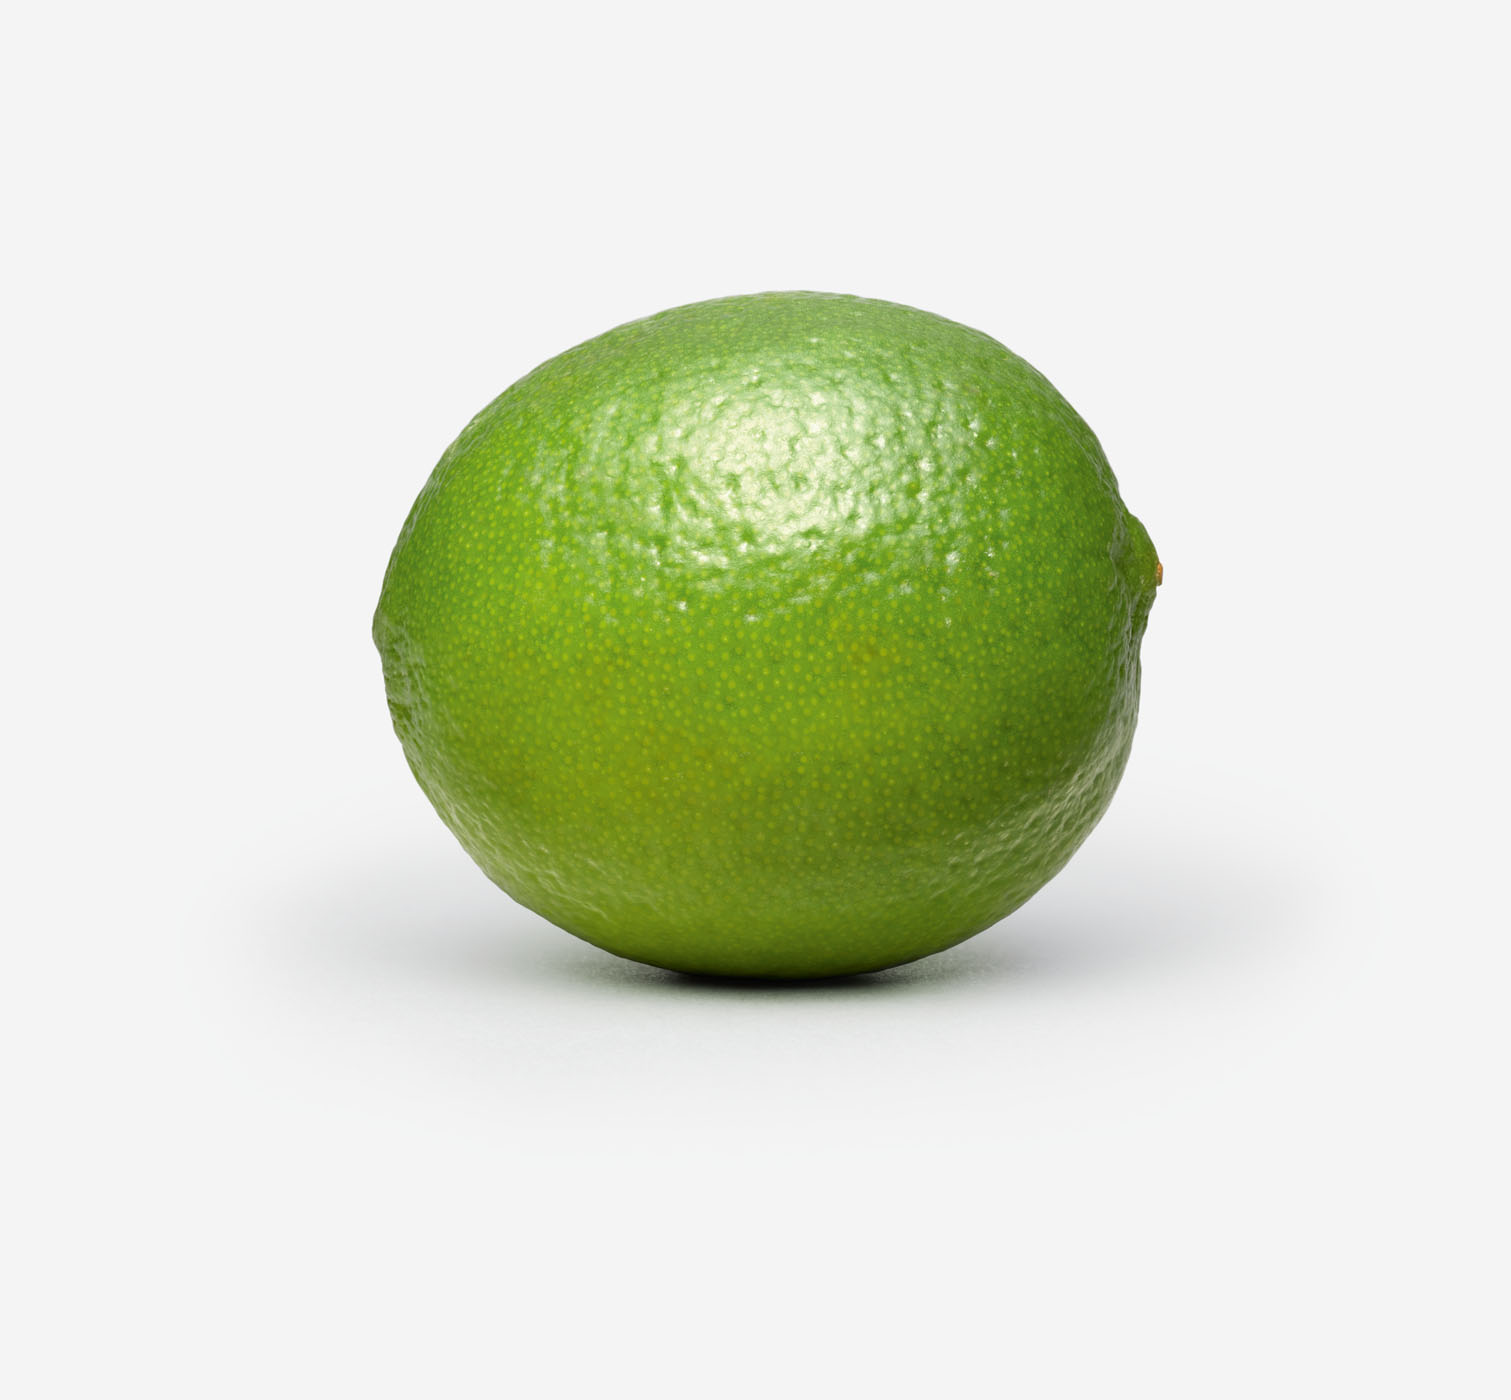 Lime photographed on studio background by Alexander Kent.